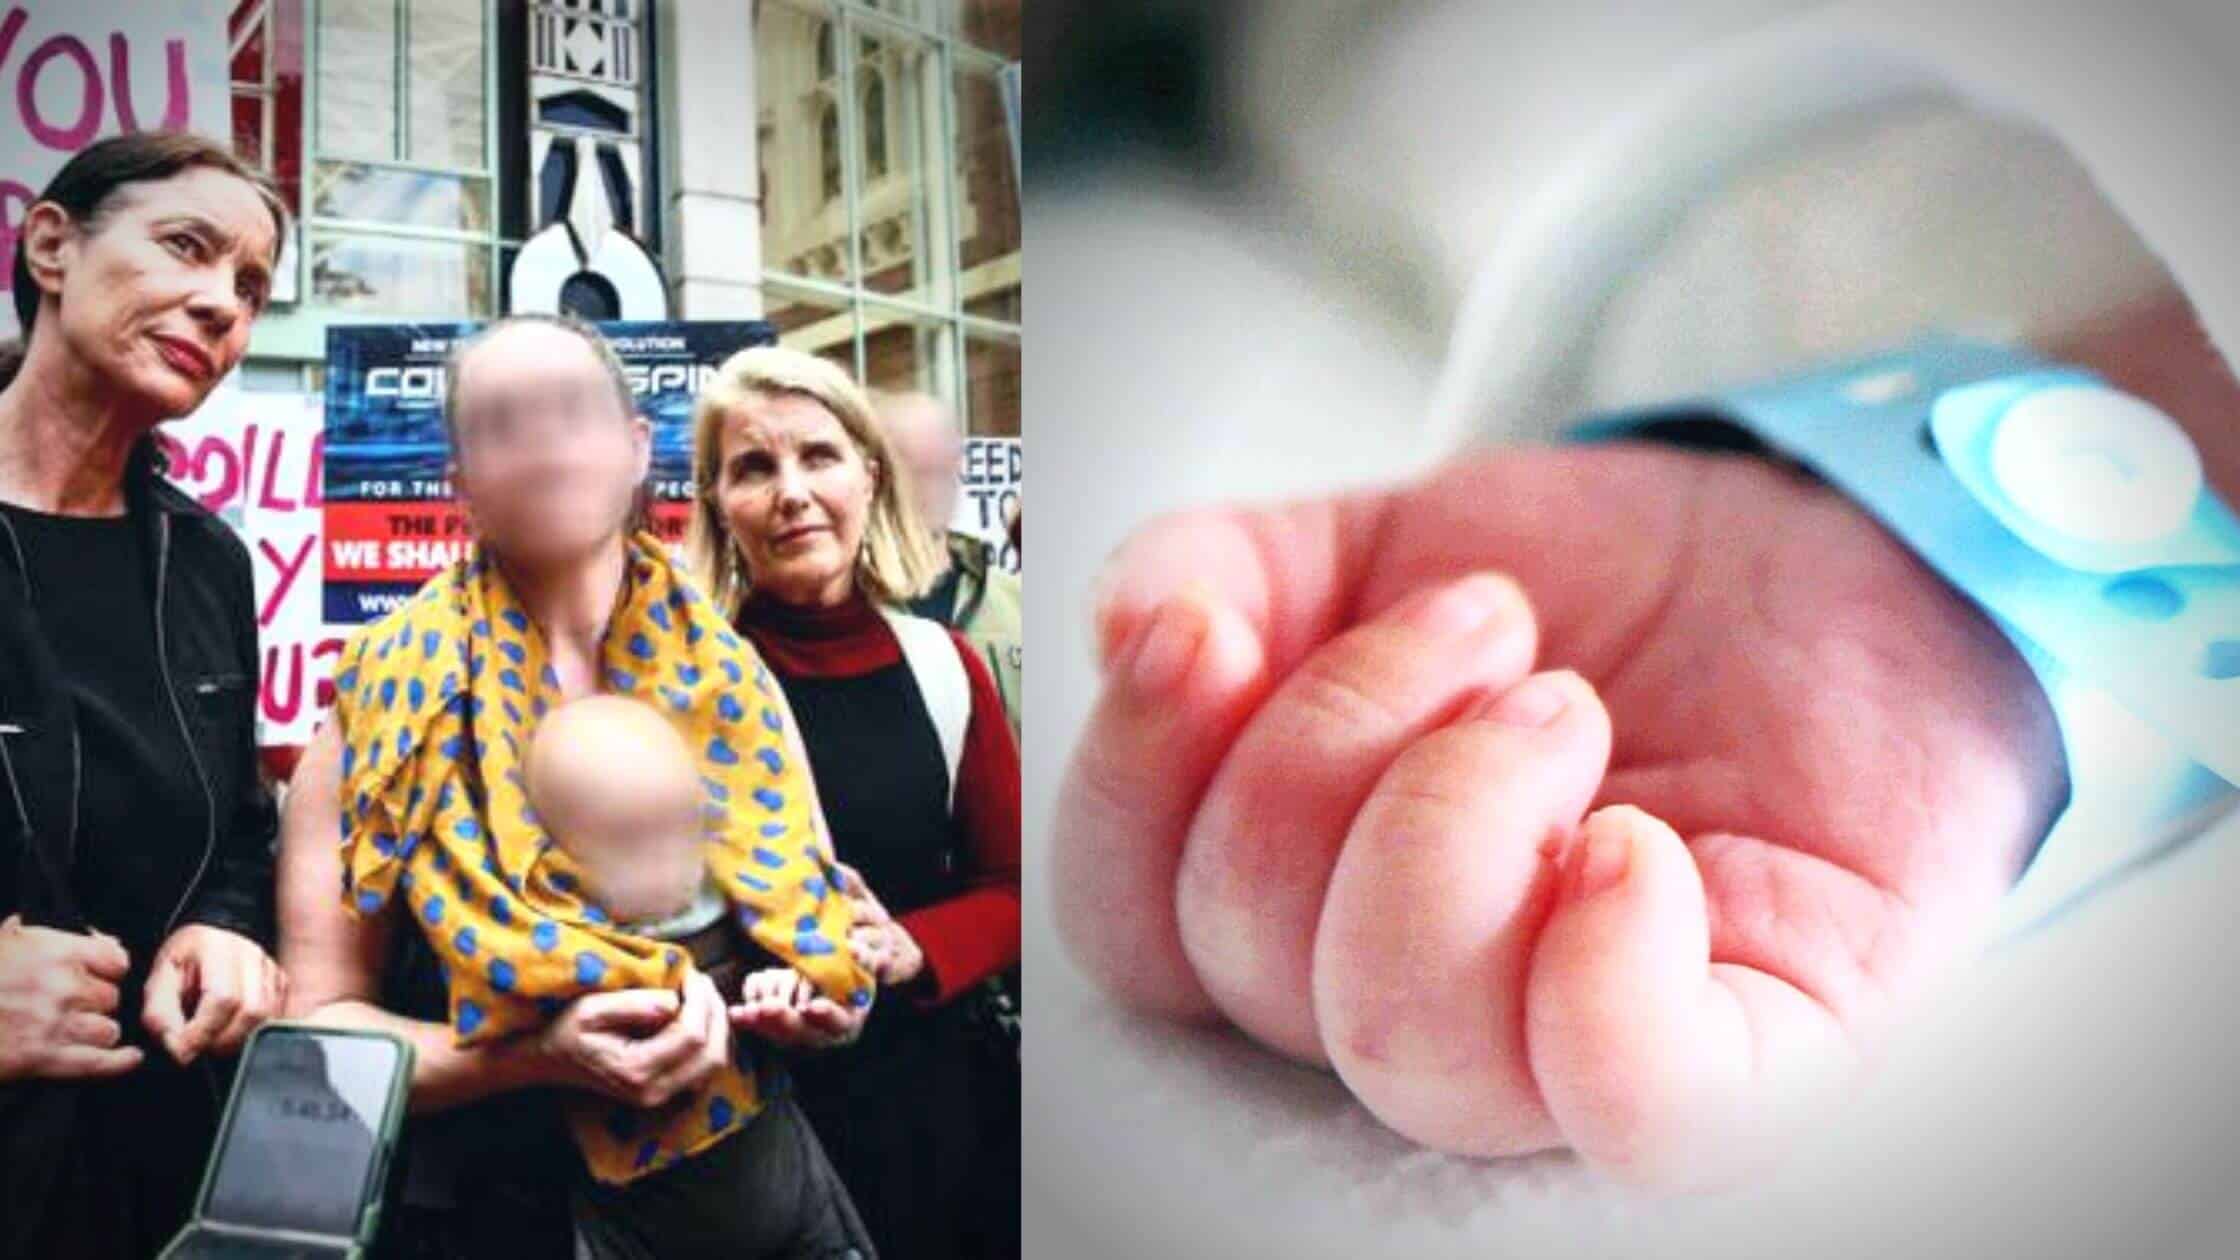 Parents Refused Vaccinated Blood: Ill Baby On New Zealand Court Custody